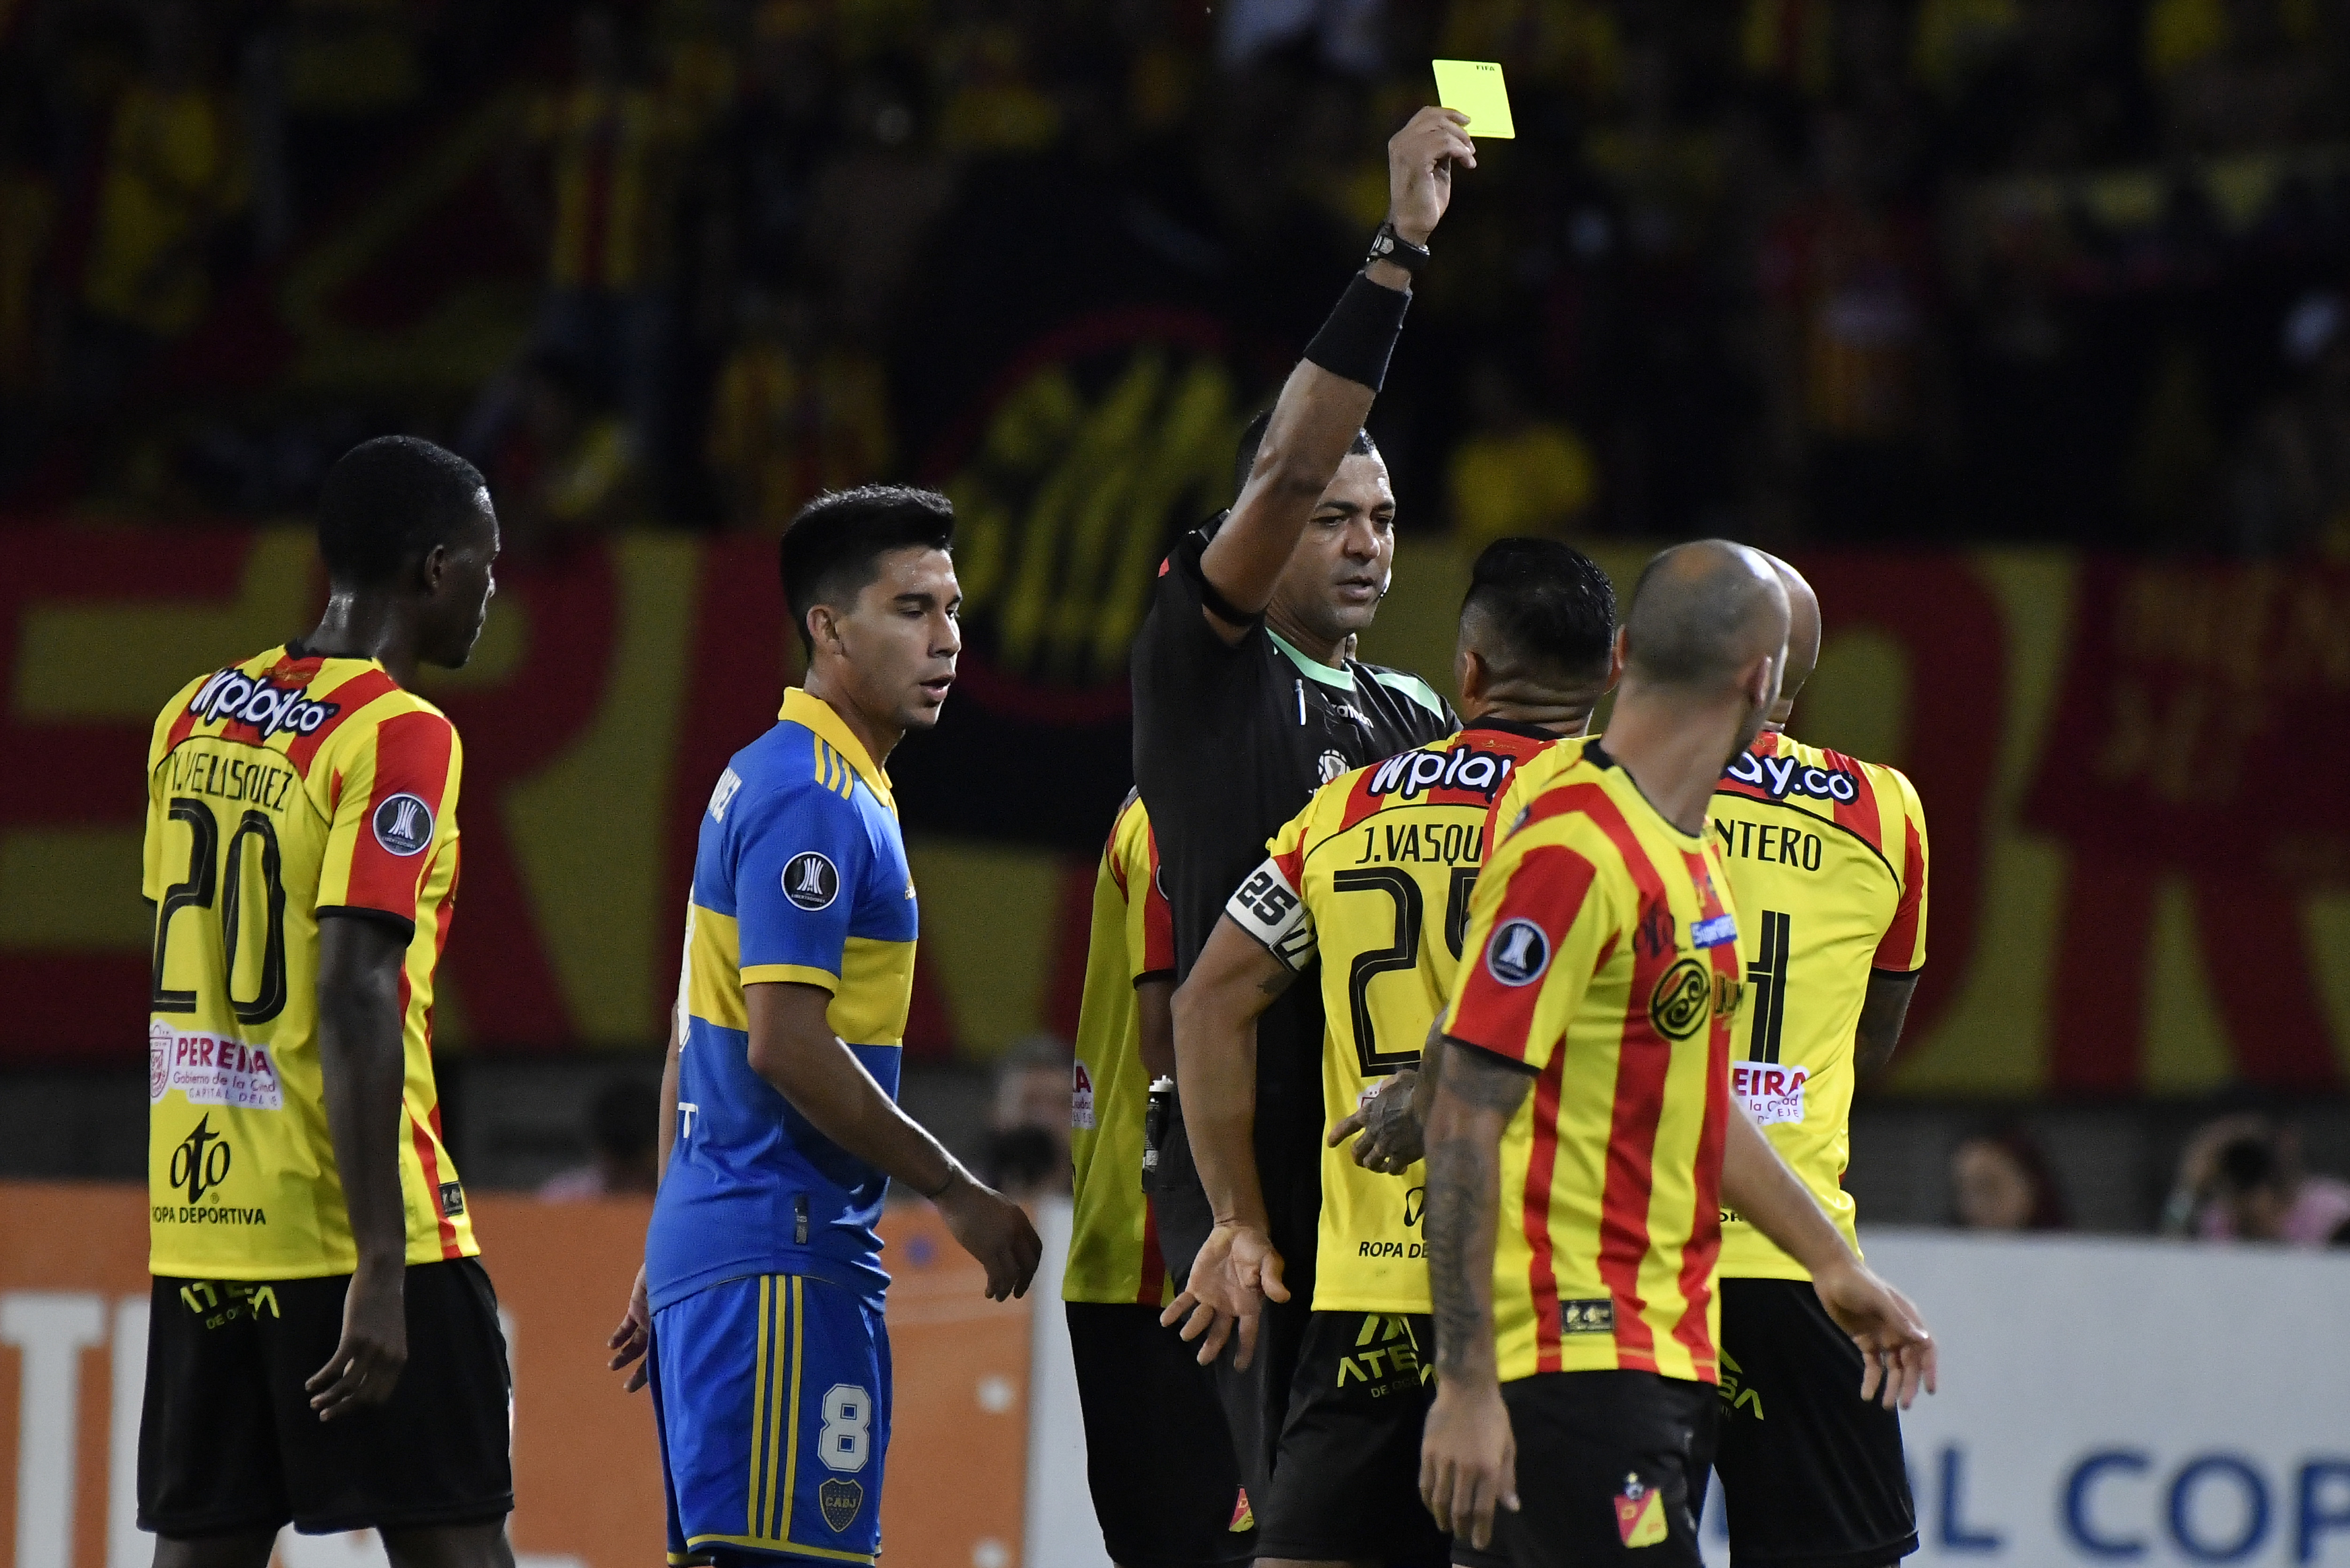 PEREIRA, COLOMBIA - MAY 24: Referee Wagner Magalhaes shows yellow card to Juan Quintero of Pereira during the Copa CONMEBOL Libertadores 2023 group F match between Deportivo Pereira and Boca Juniors at Estadio Hernan Ramirez Villegas on May 24, 2023 in Pereira, Colombia. (Photo by Gabriel Aponte/Getty Images)